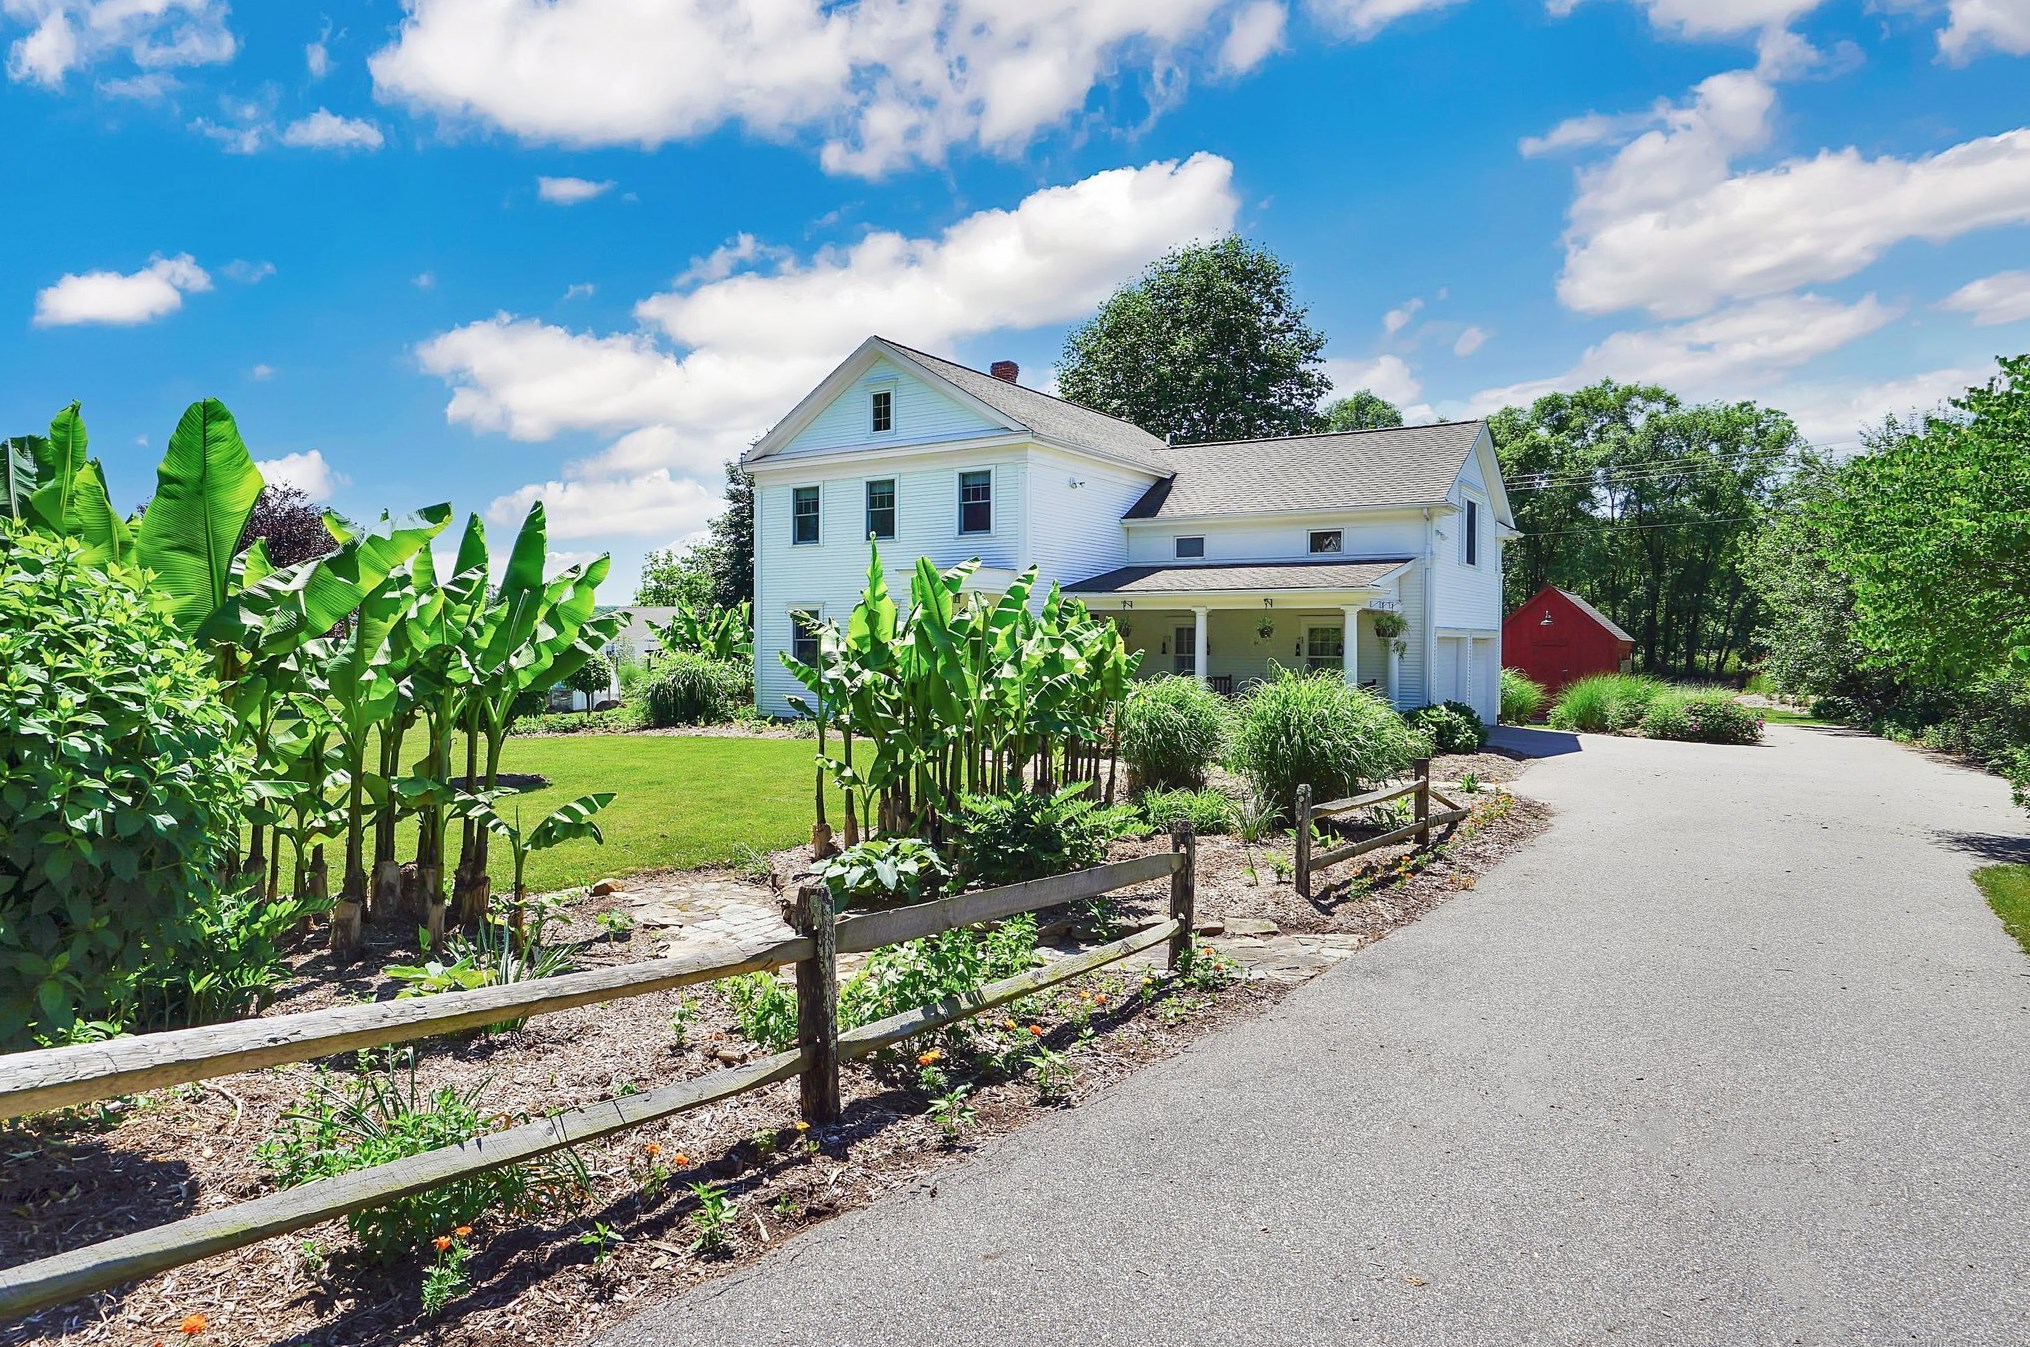 9 Old Schoolhouse Rd, Storrs Mansfield, CT 06268